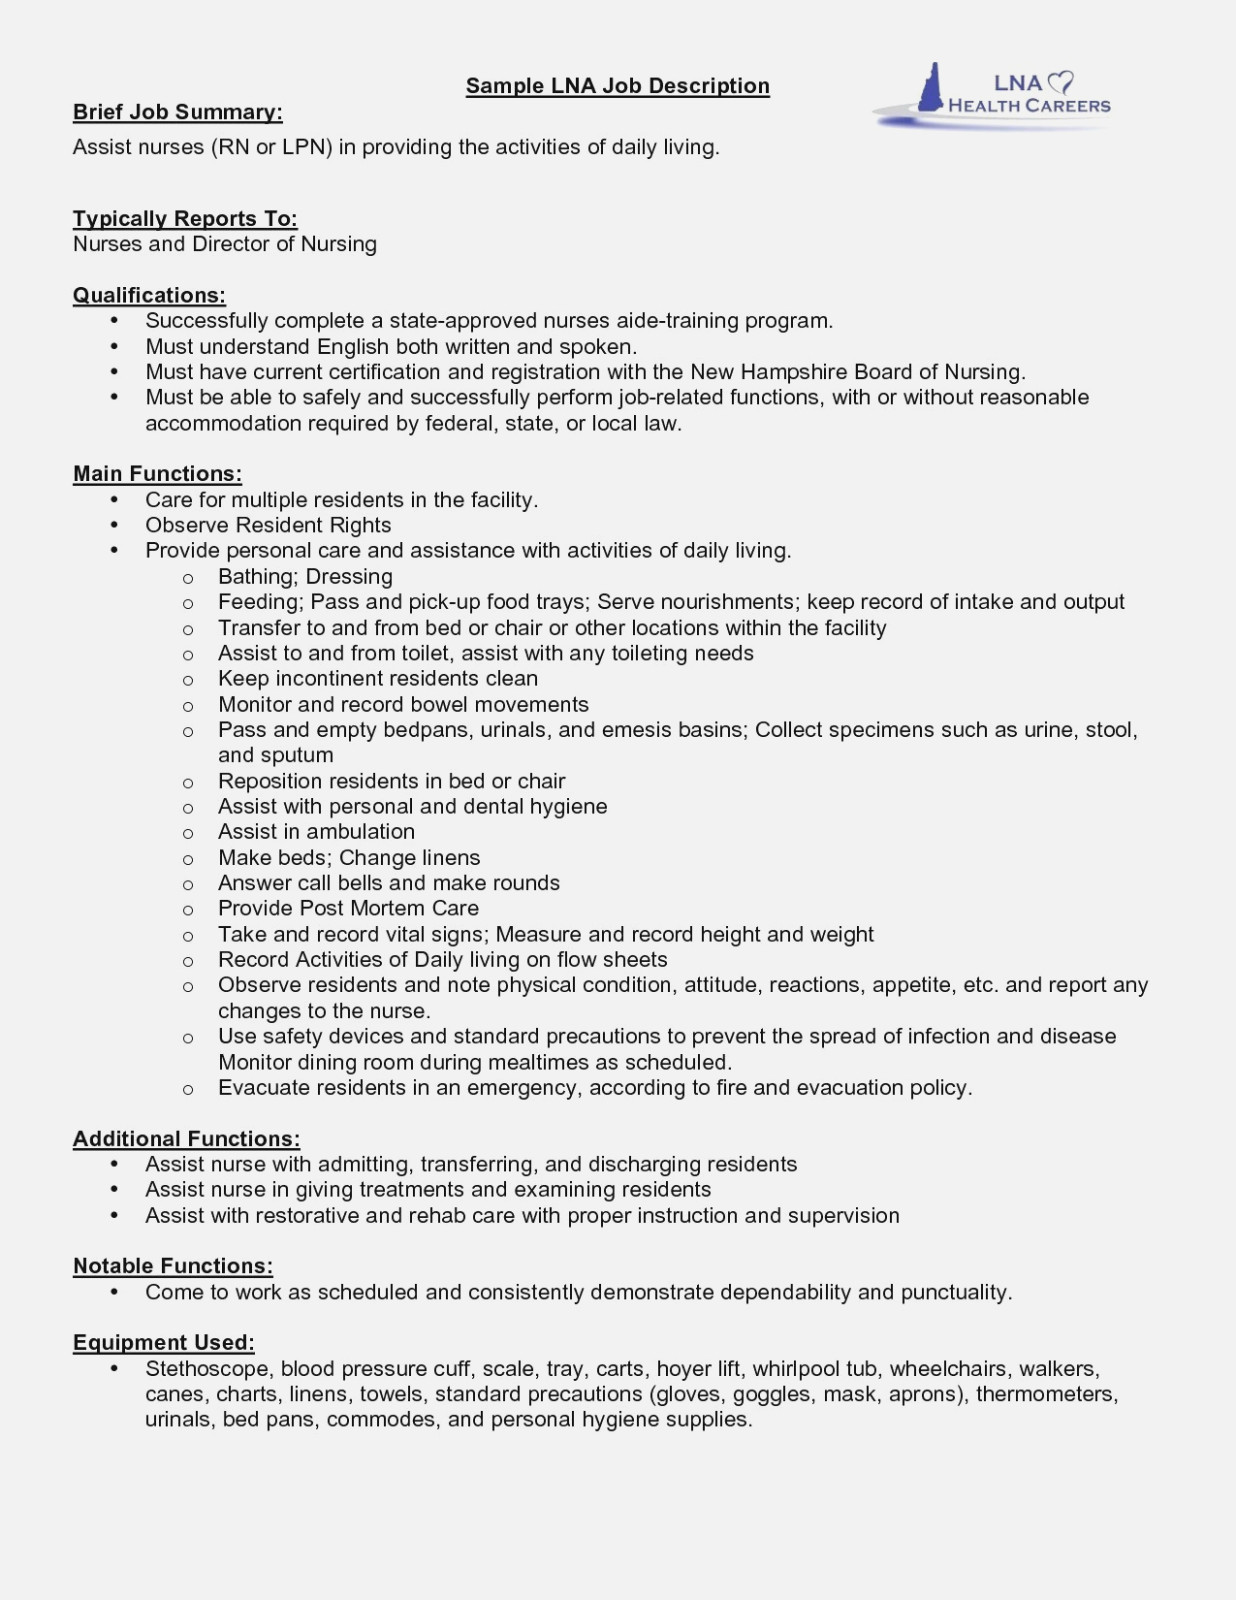 Federal Resume Template Federal Resume Guide Sakuranbogumi Com Federal Resume Guide federal resume template|wikiresume.com